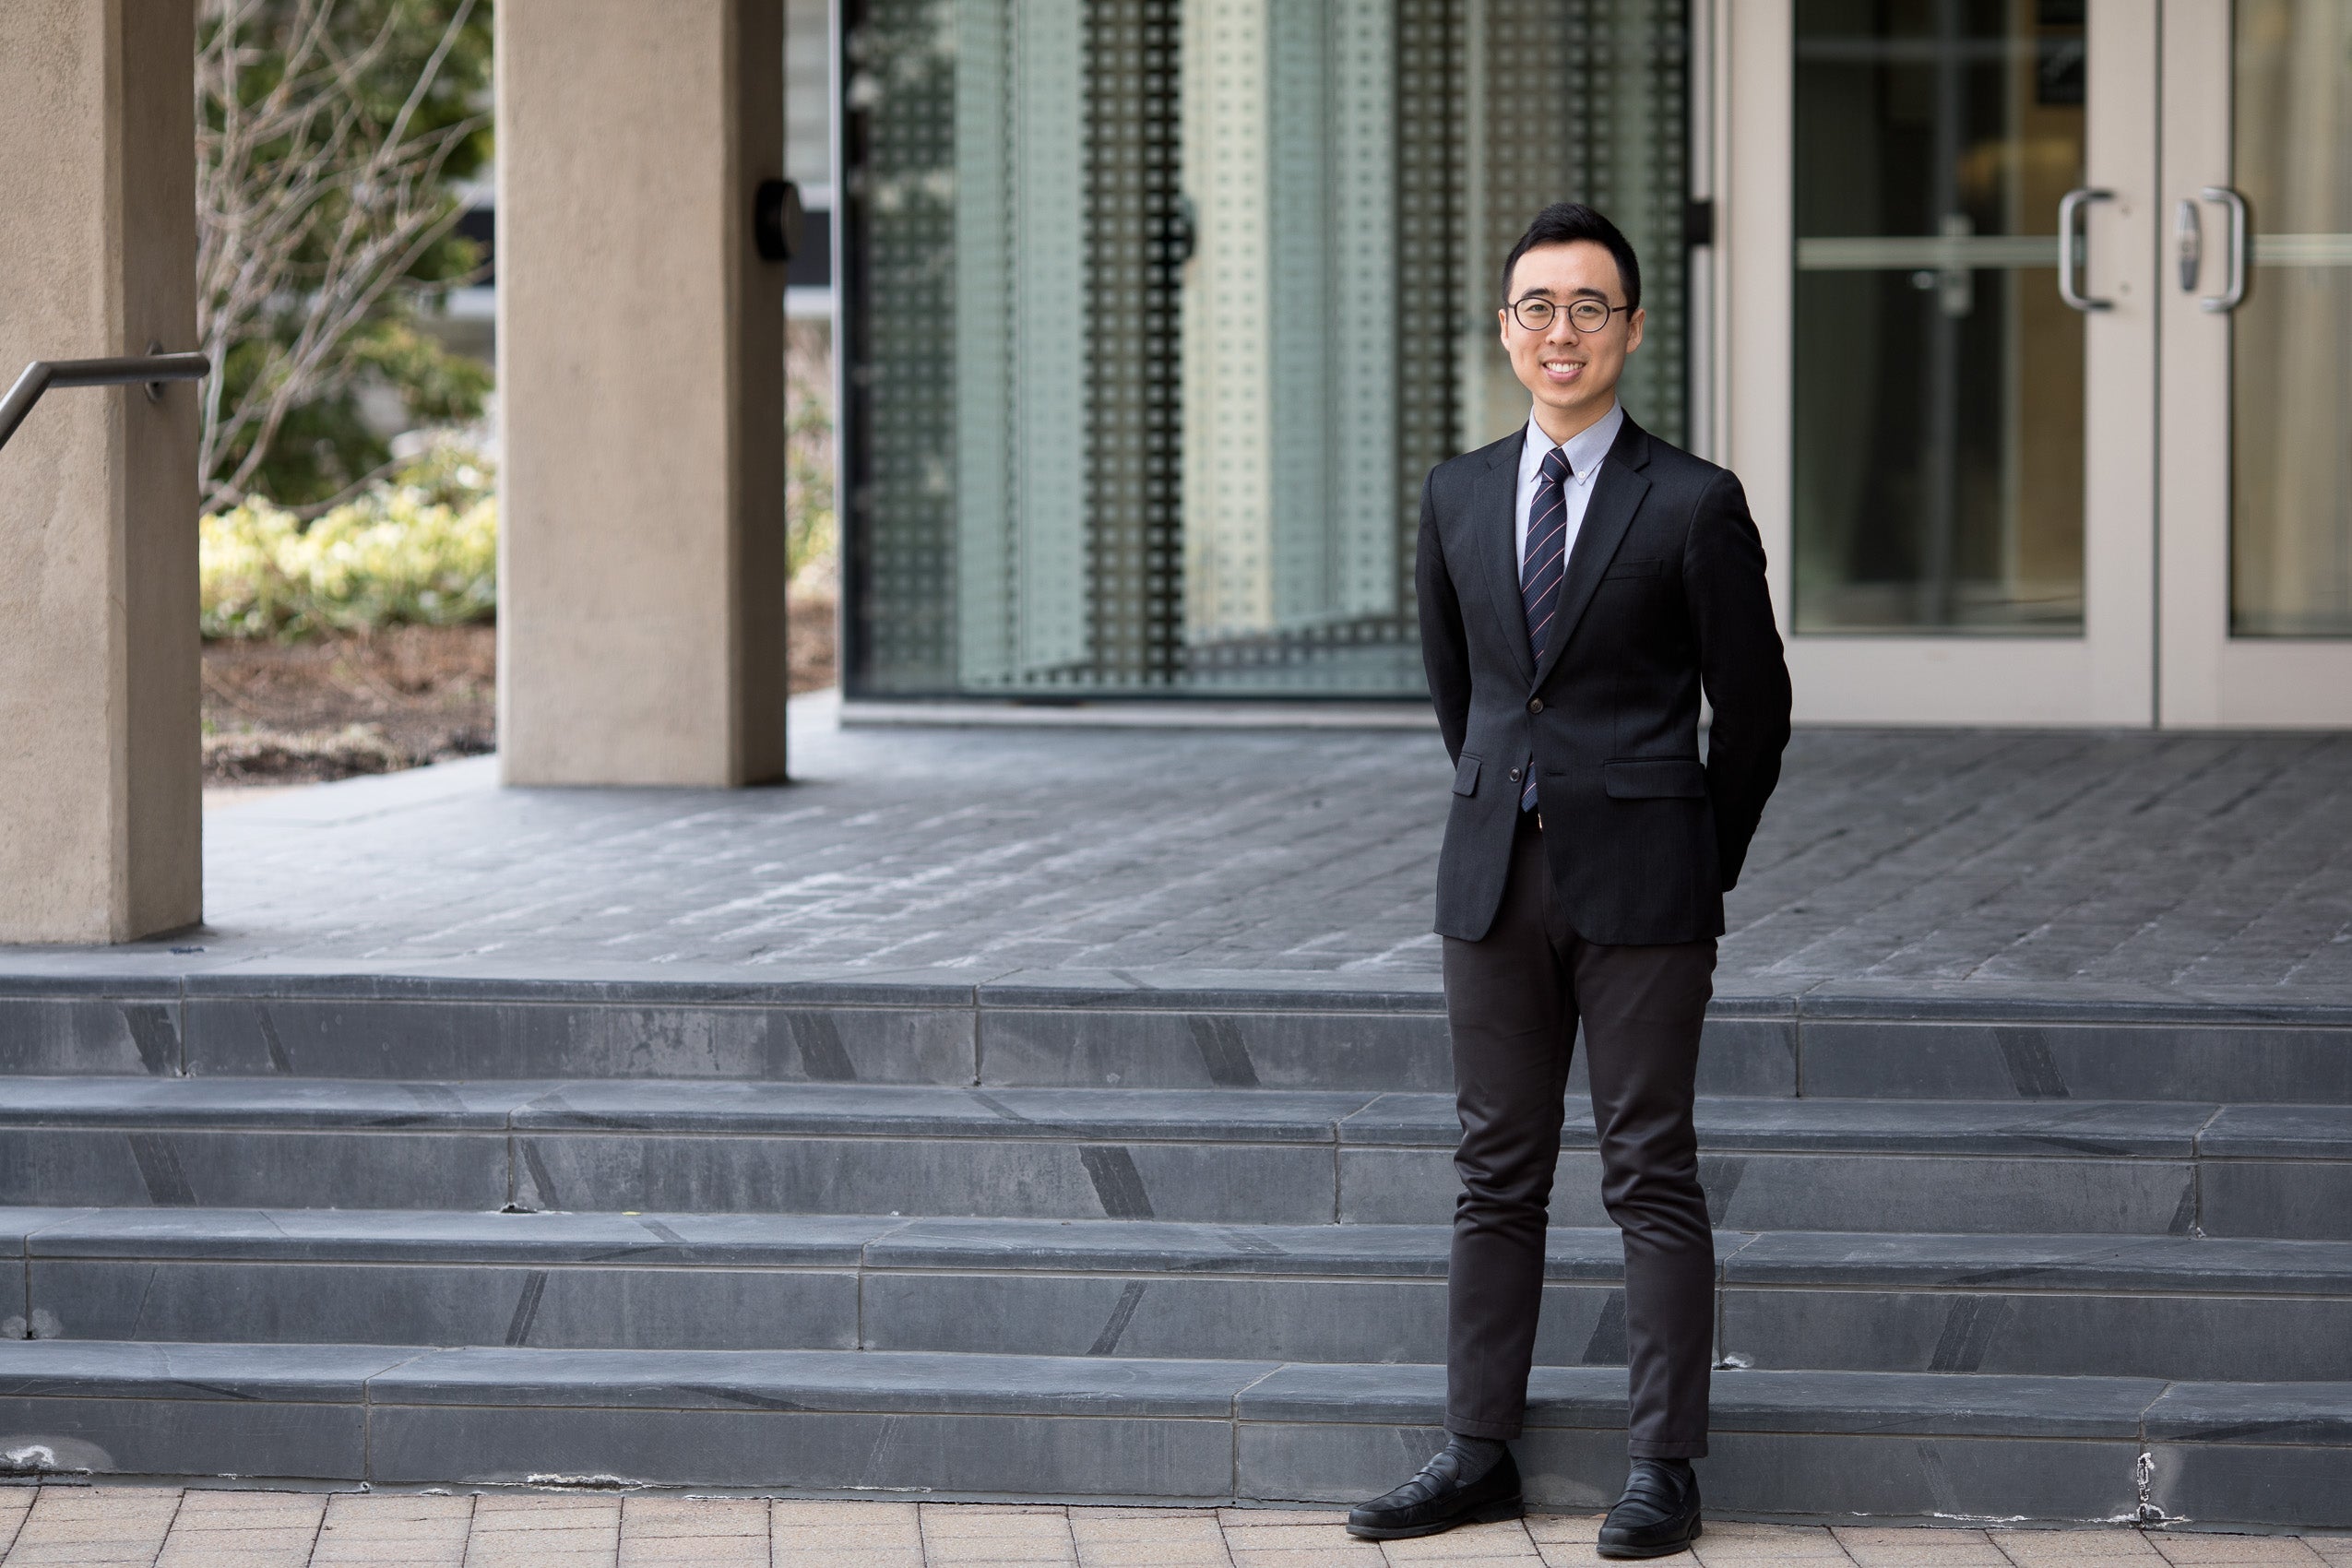 An advocate for children, Ha Ryong (Michael) Jung ’18 has also taken a wider view